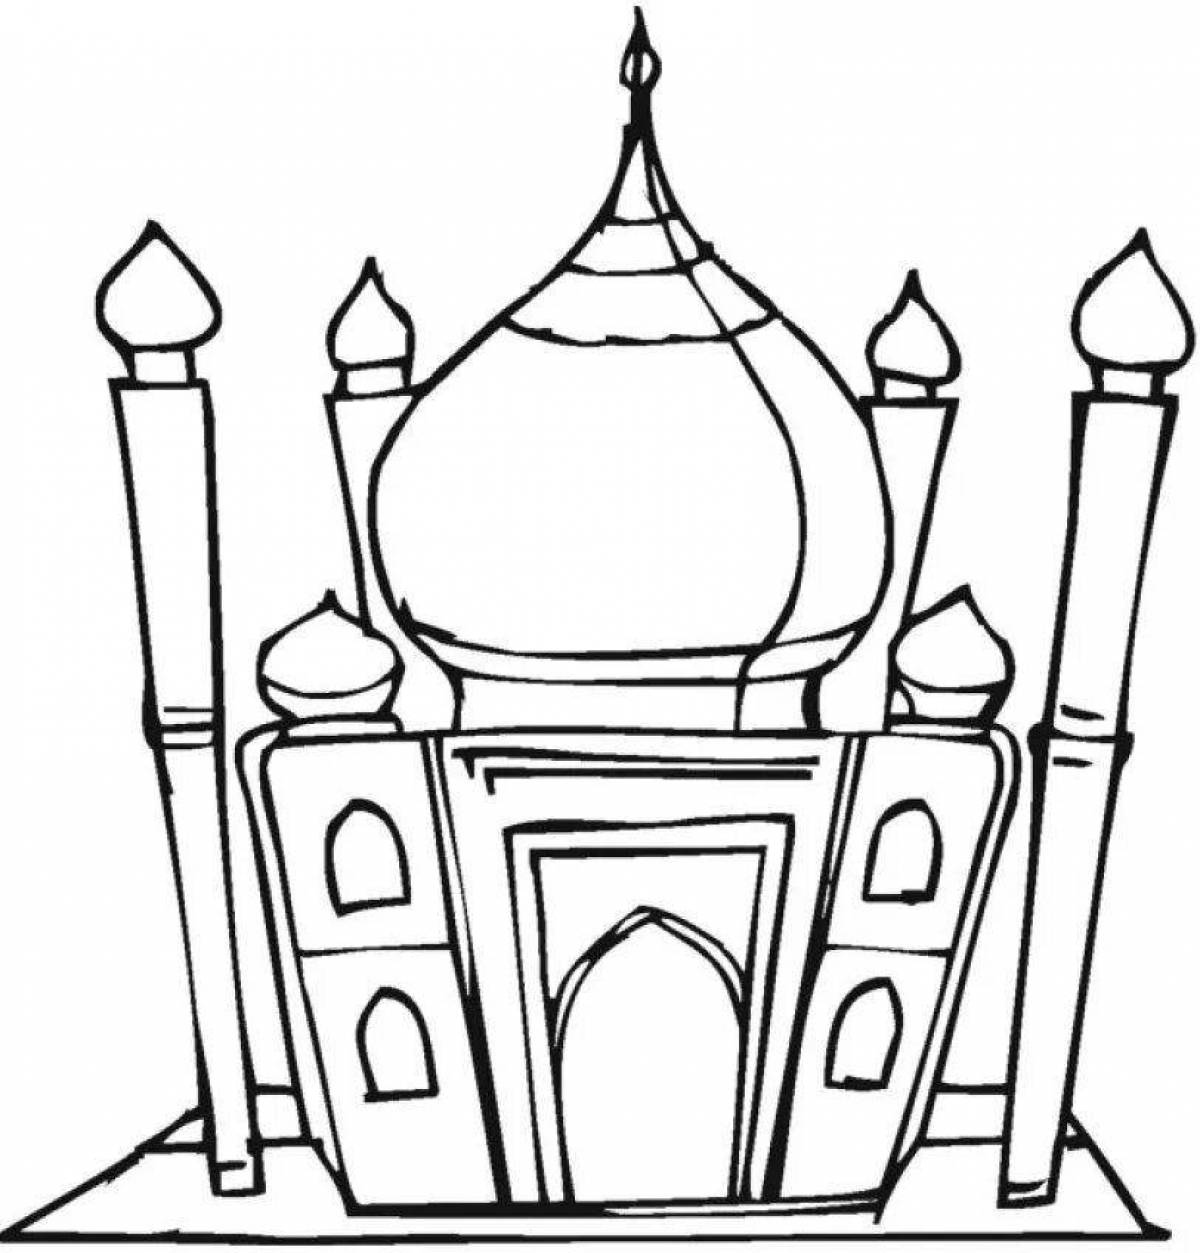 Glowing mosque coloring book for kids